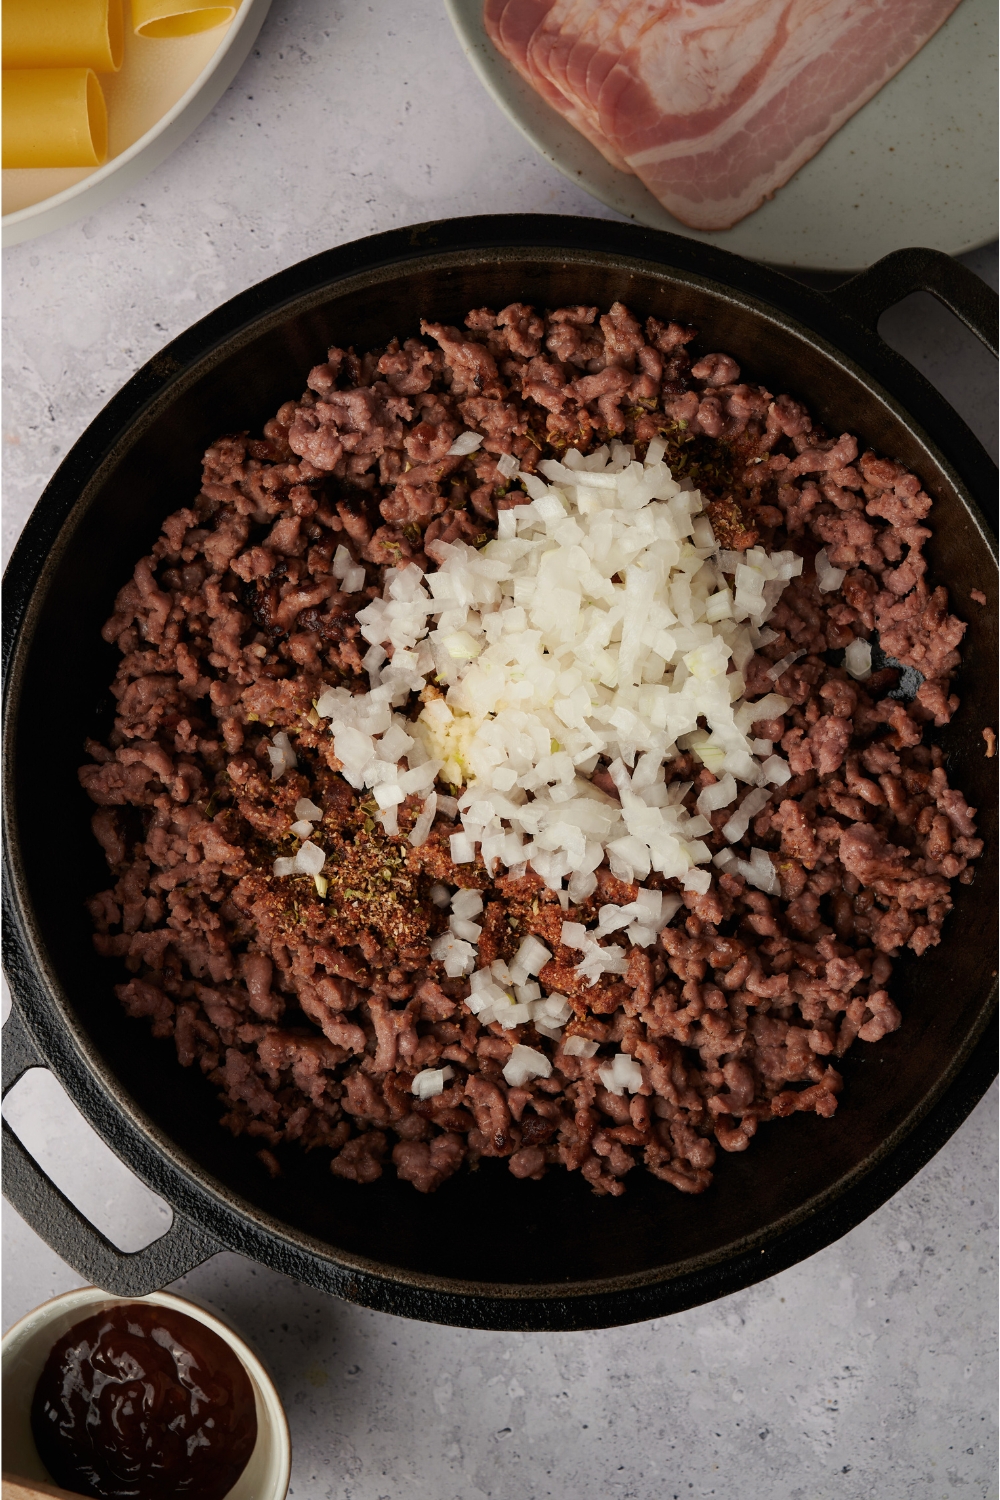 A skillet with ground beef cooking. Garlic, onions, and seasonings have just been added.